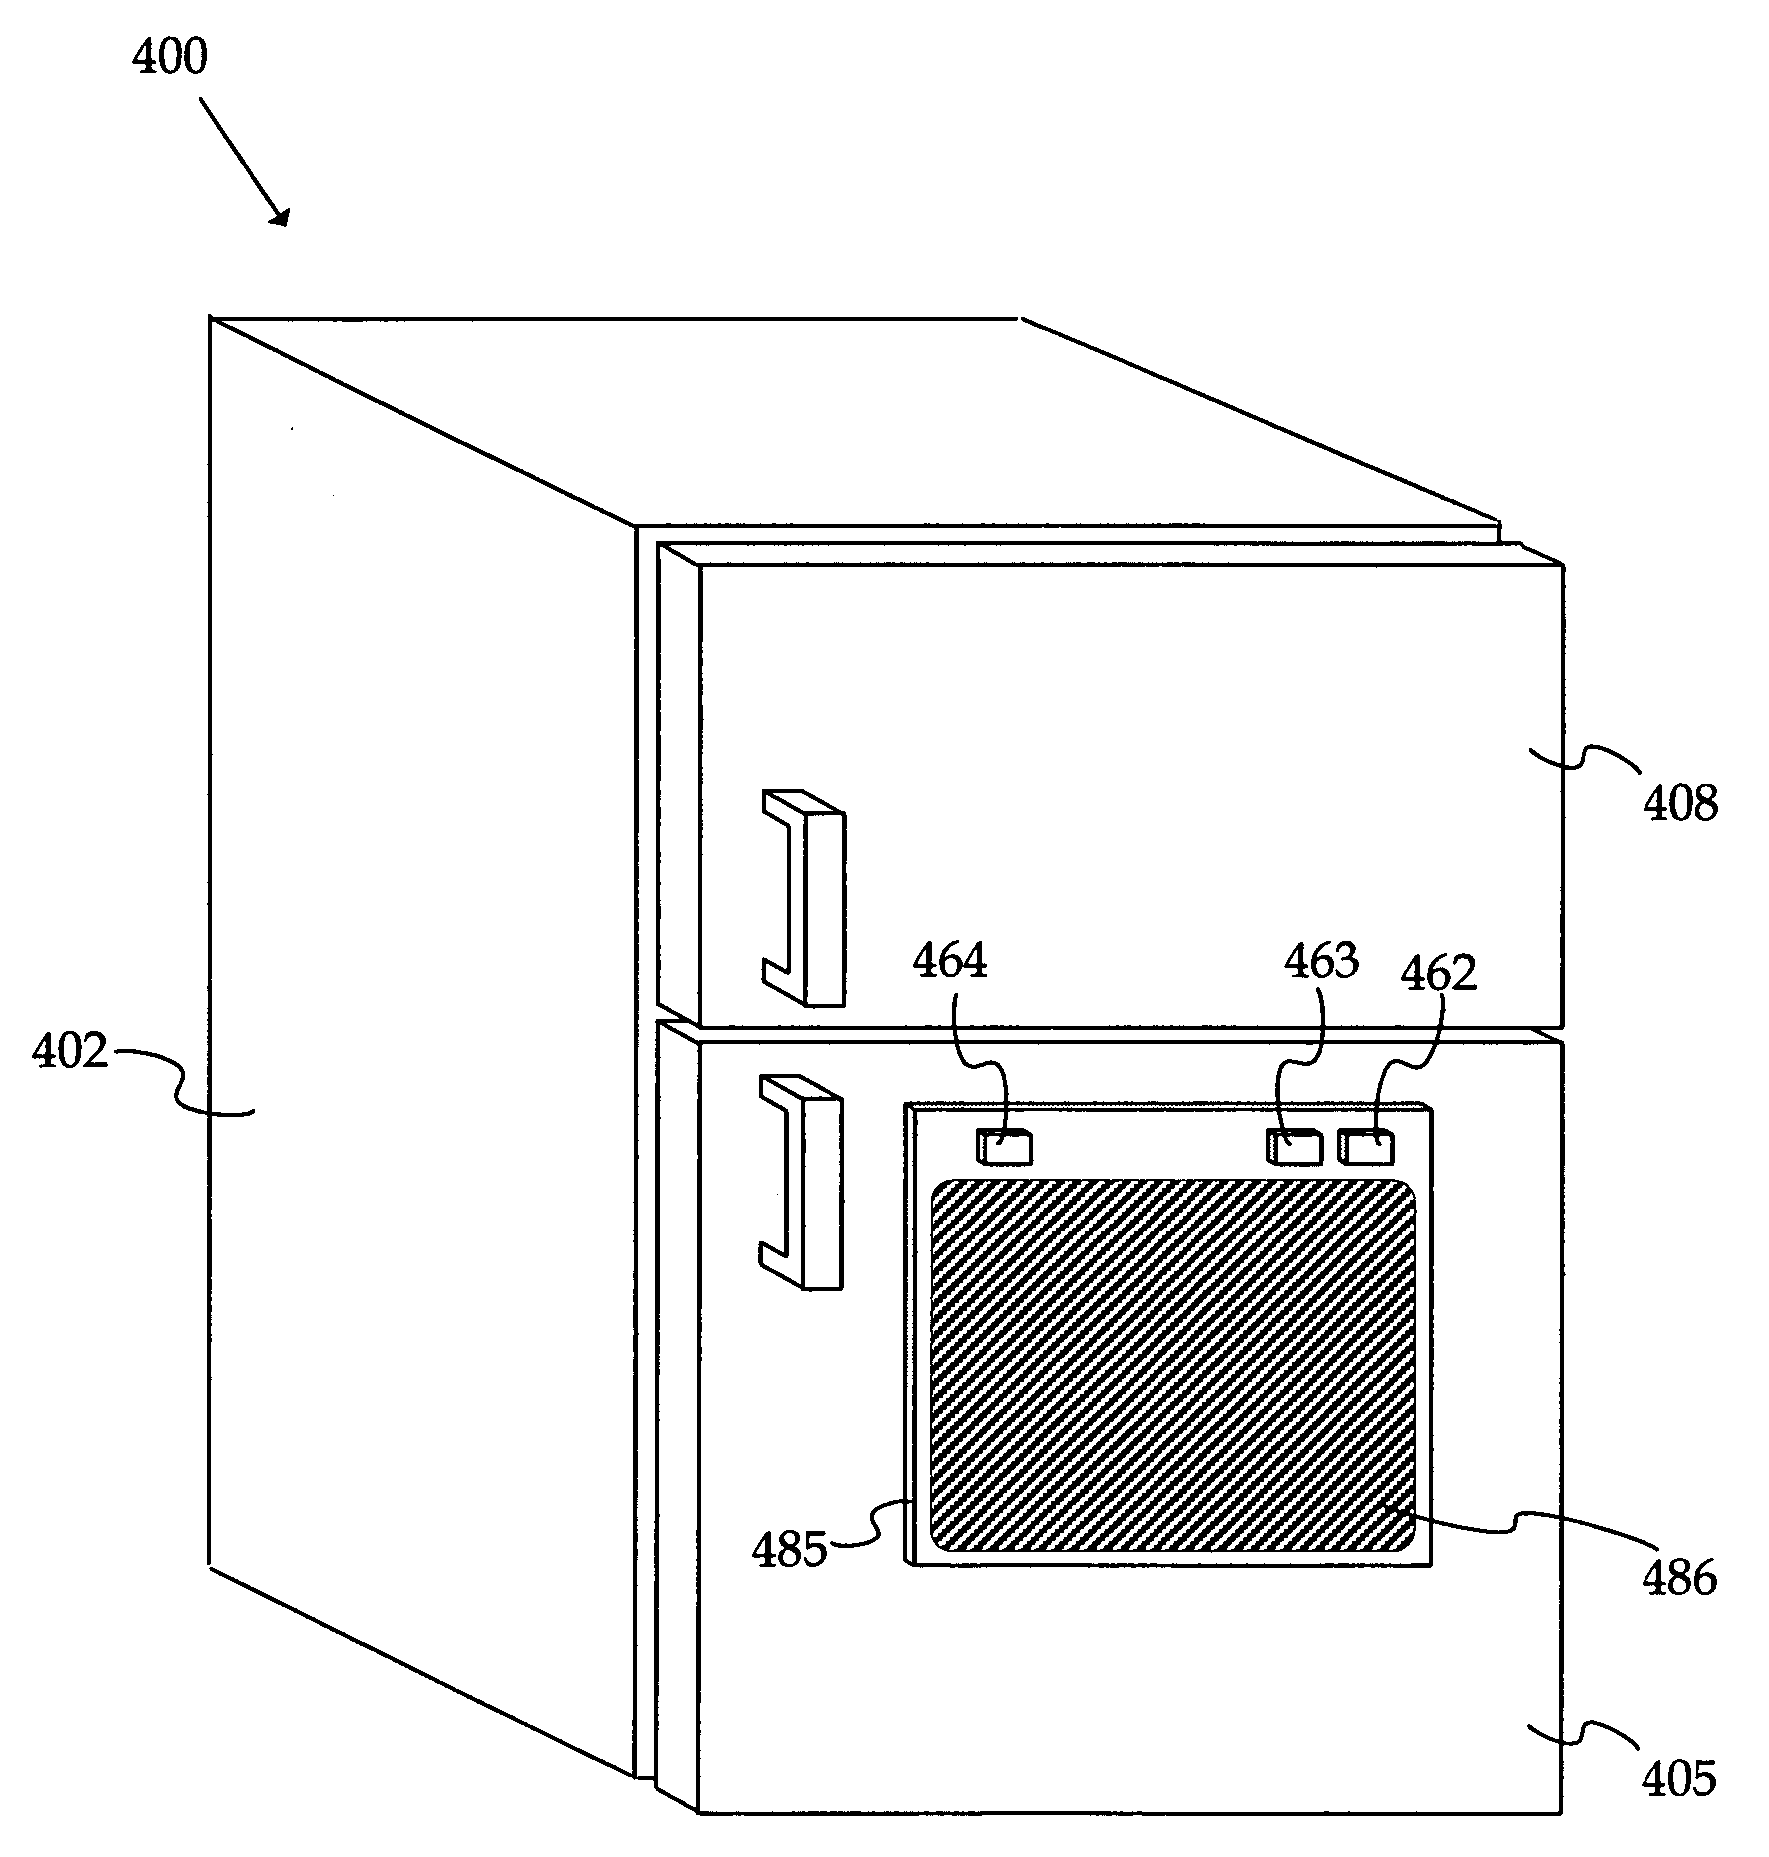 Home refrigerator systems imaging their interior and methods